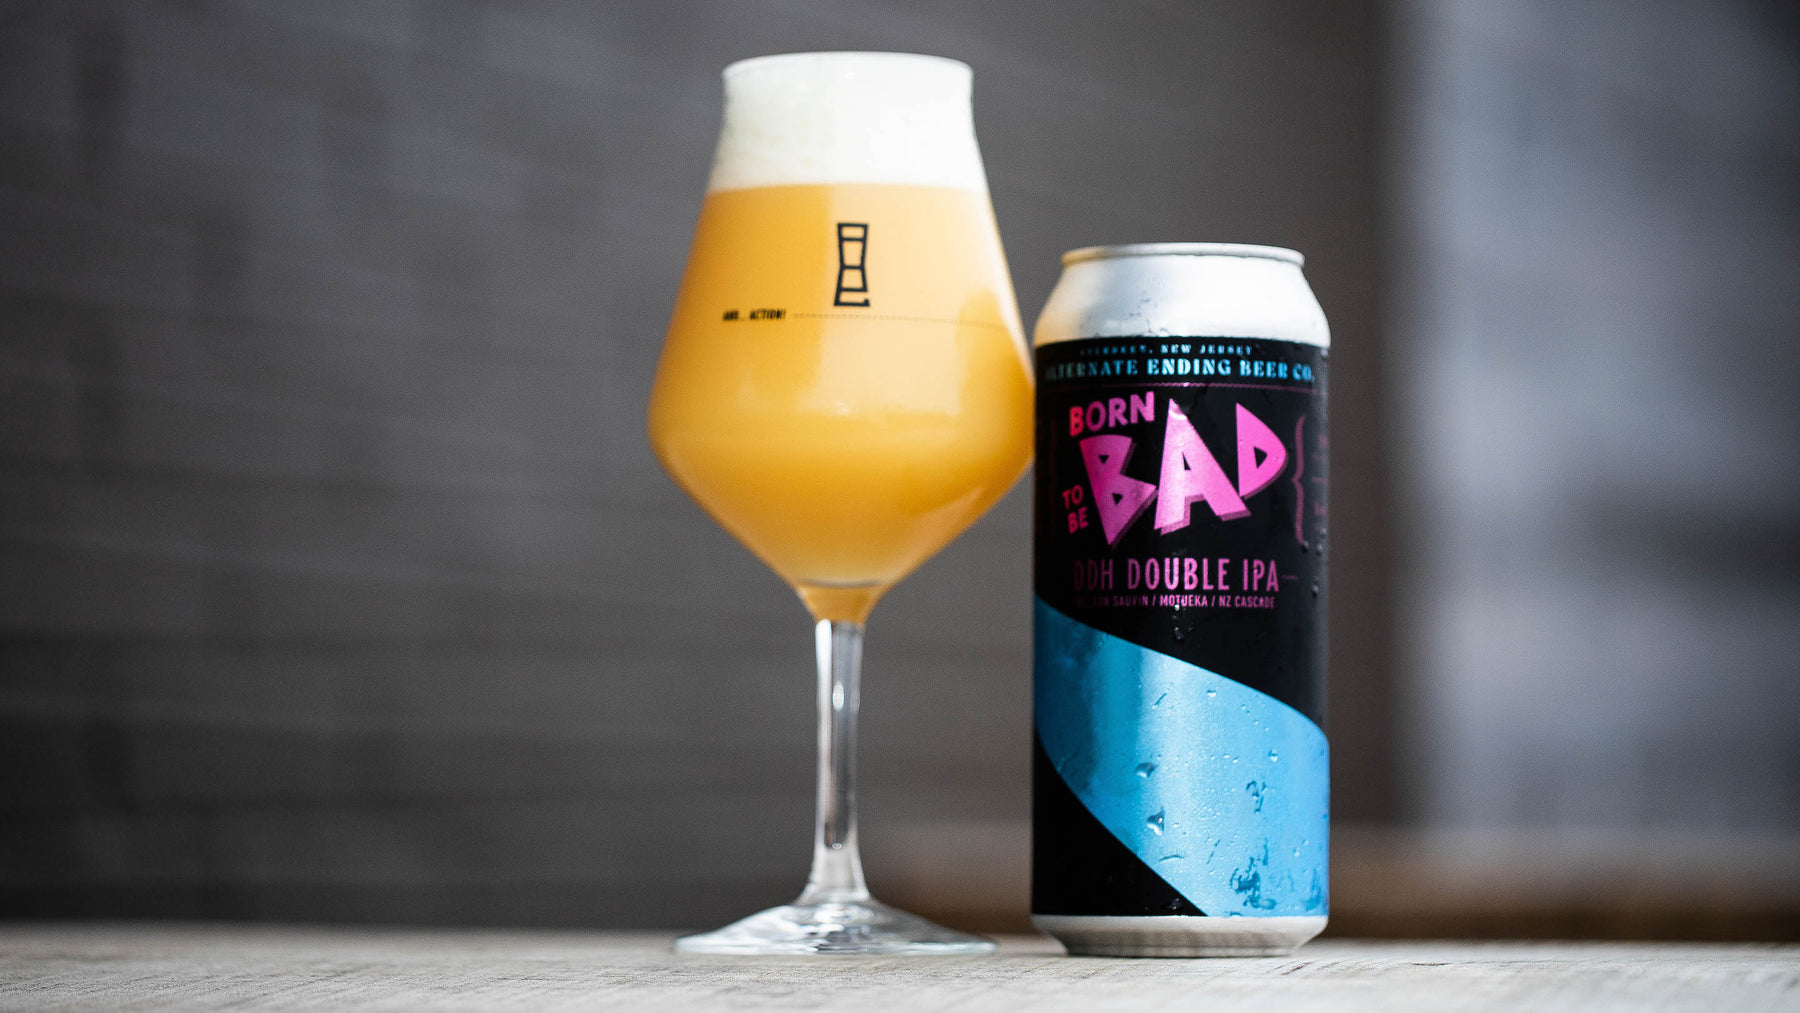 Alternate Ending Beer Co. DDH Double IPA Born To Be Bad